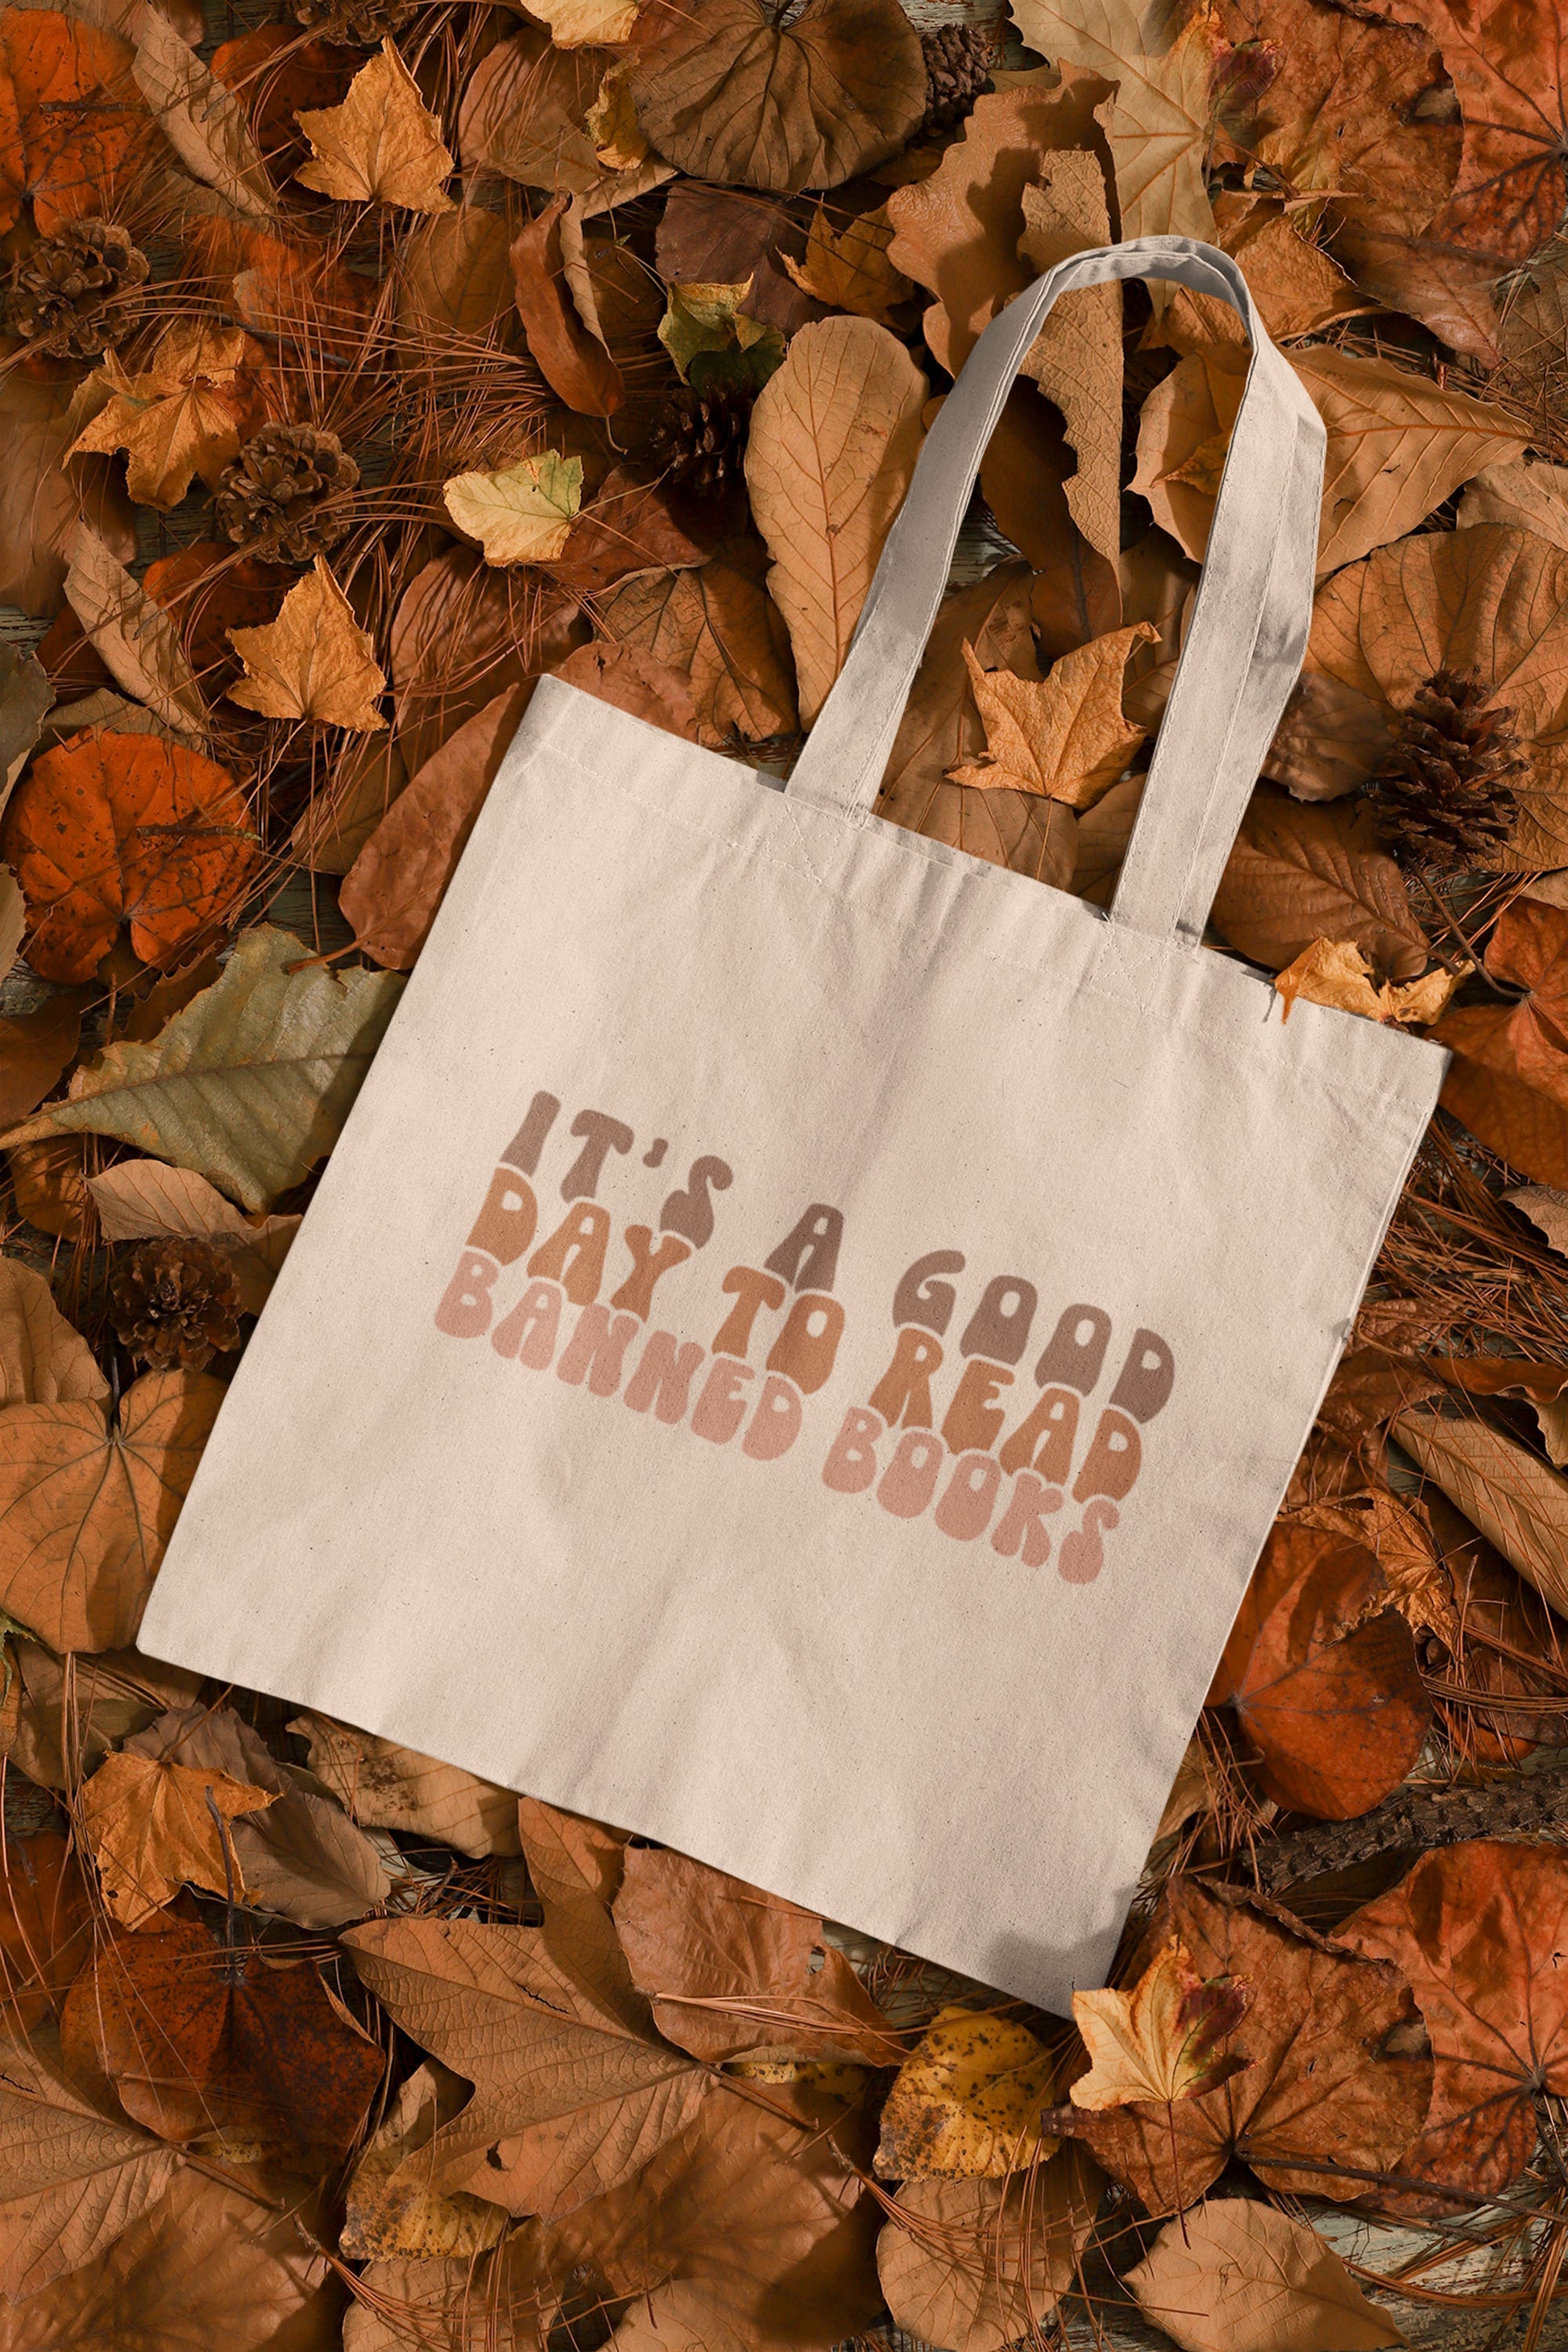 Banned Books tote bag